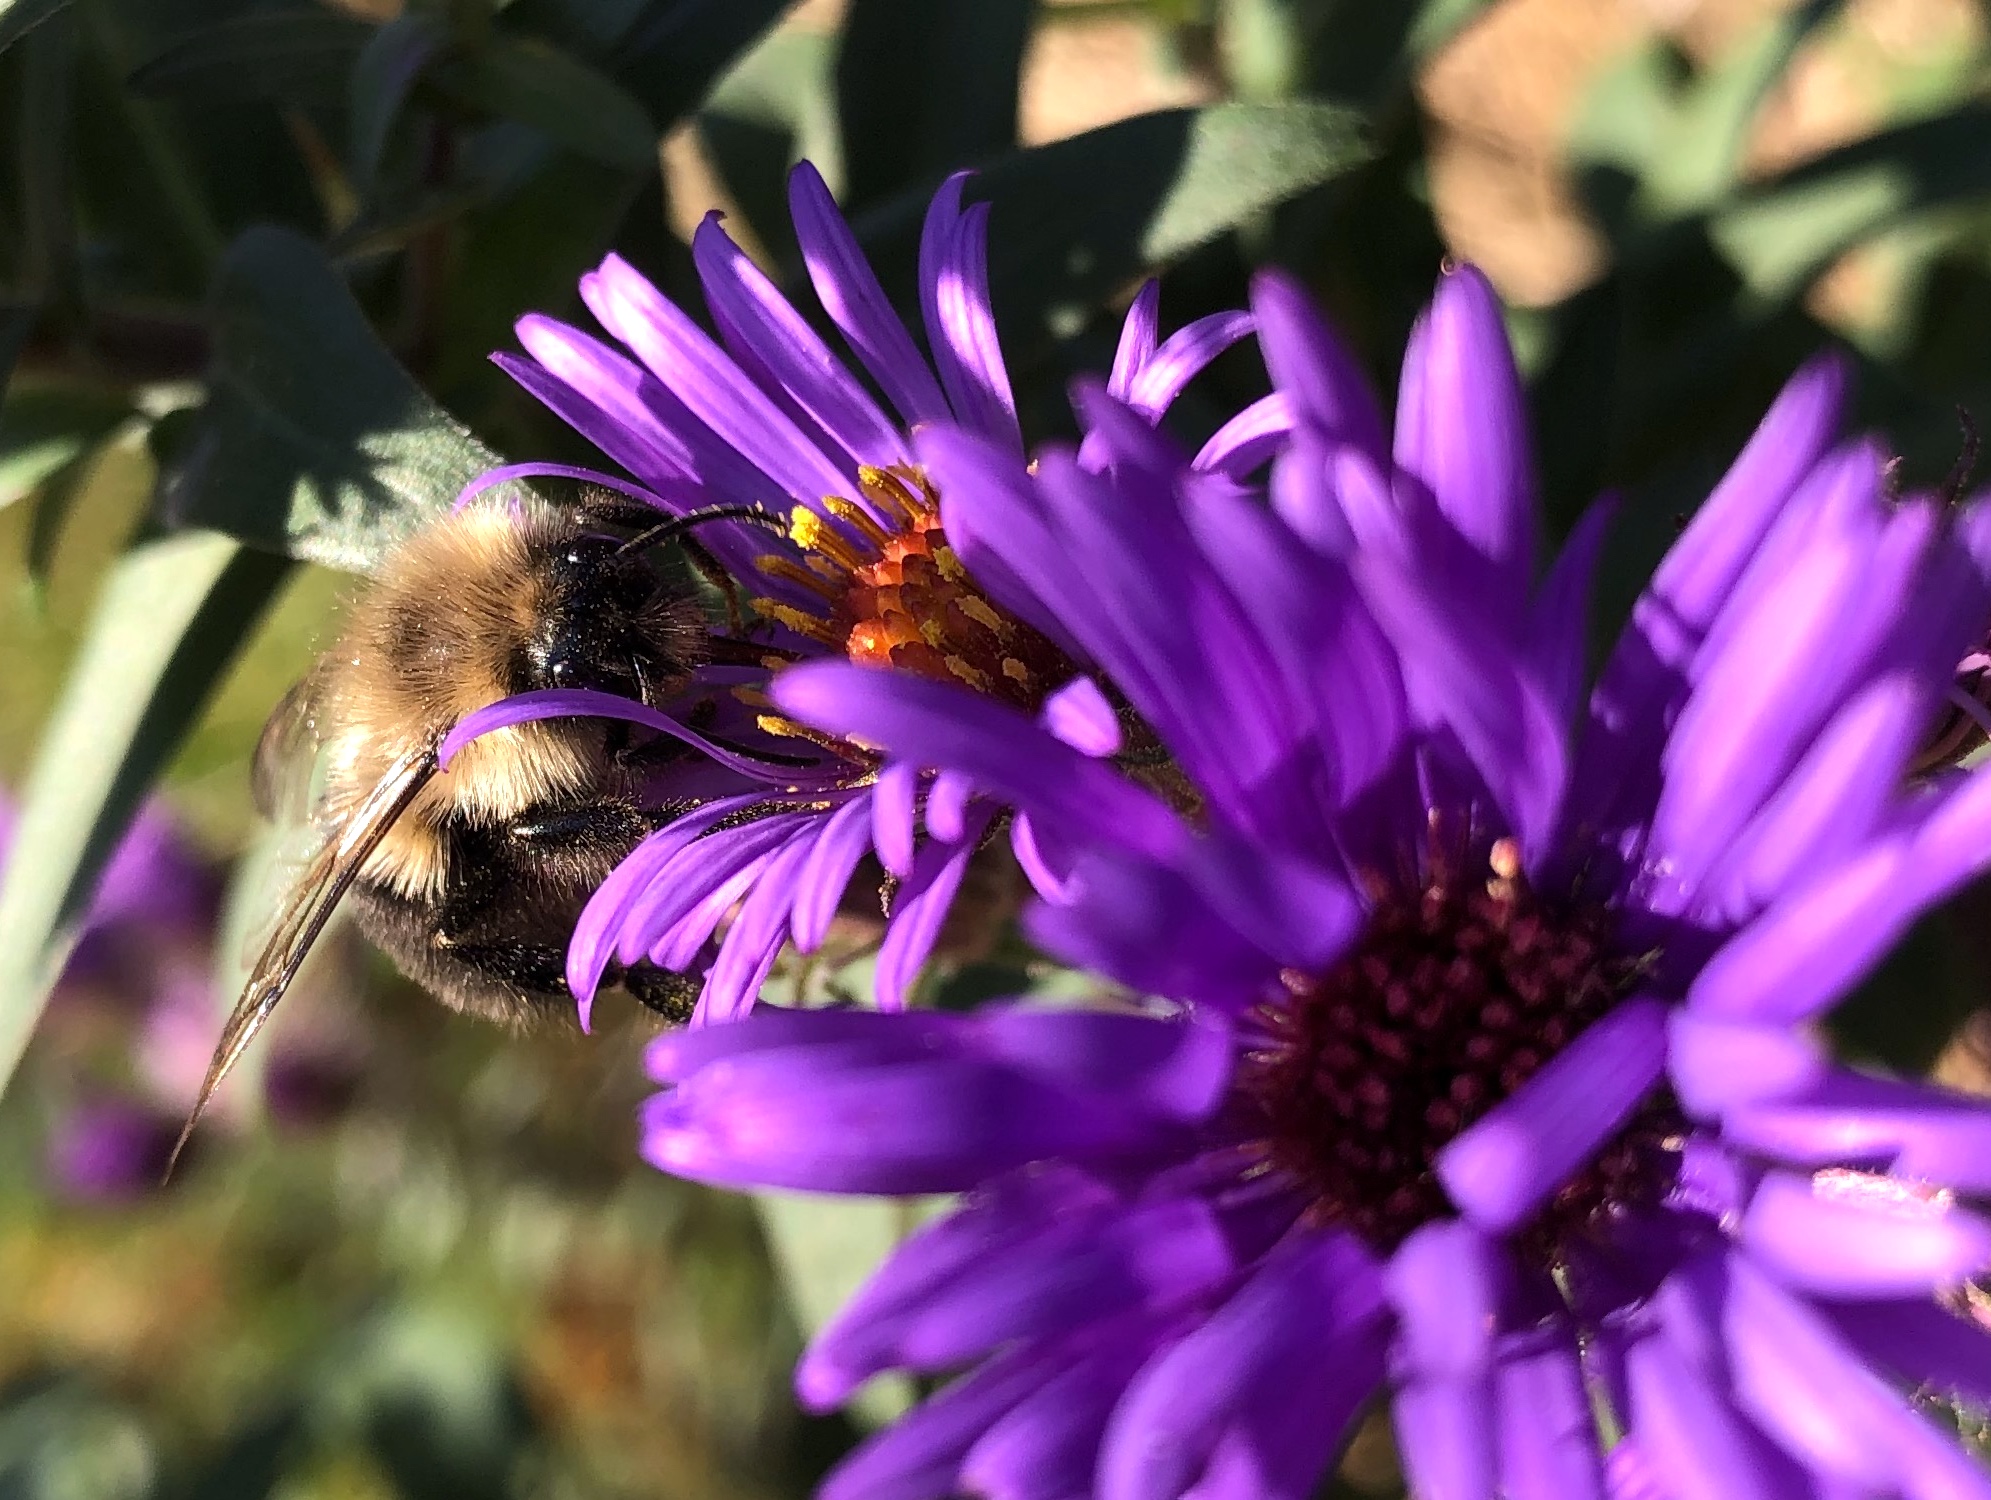 Bumblebee on aster on October 5, 2020.